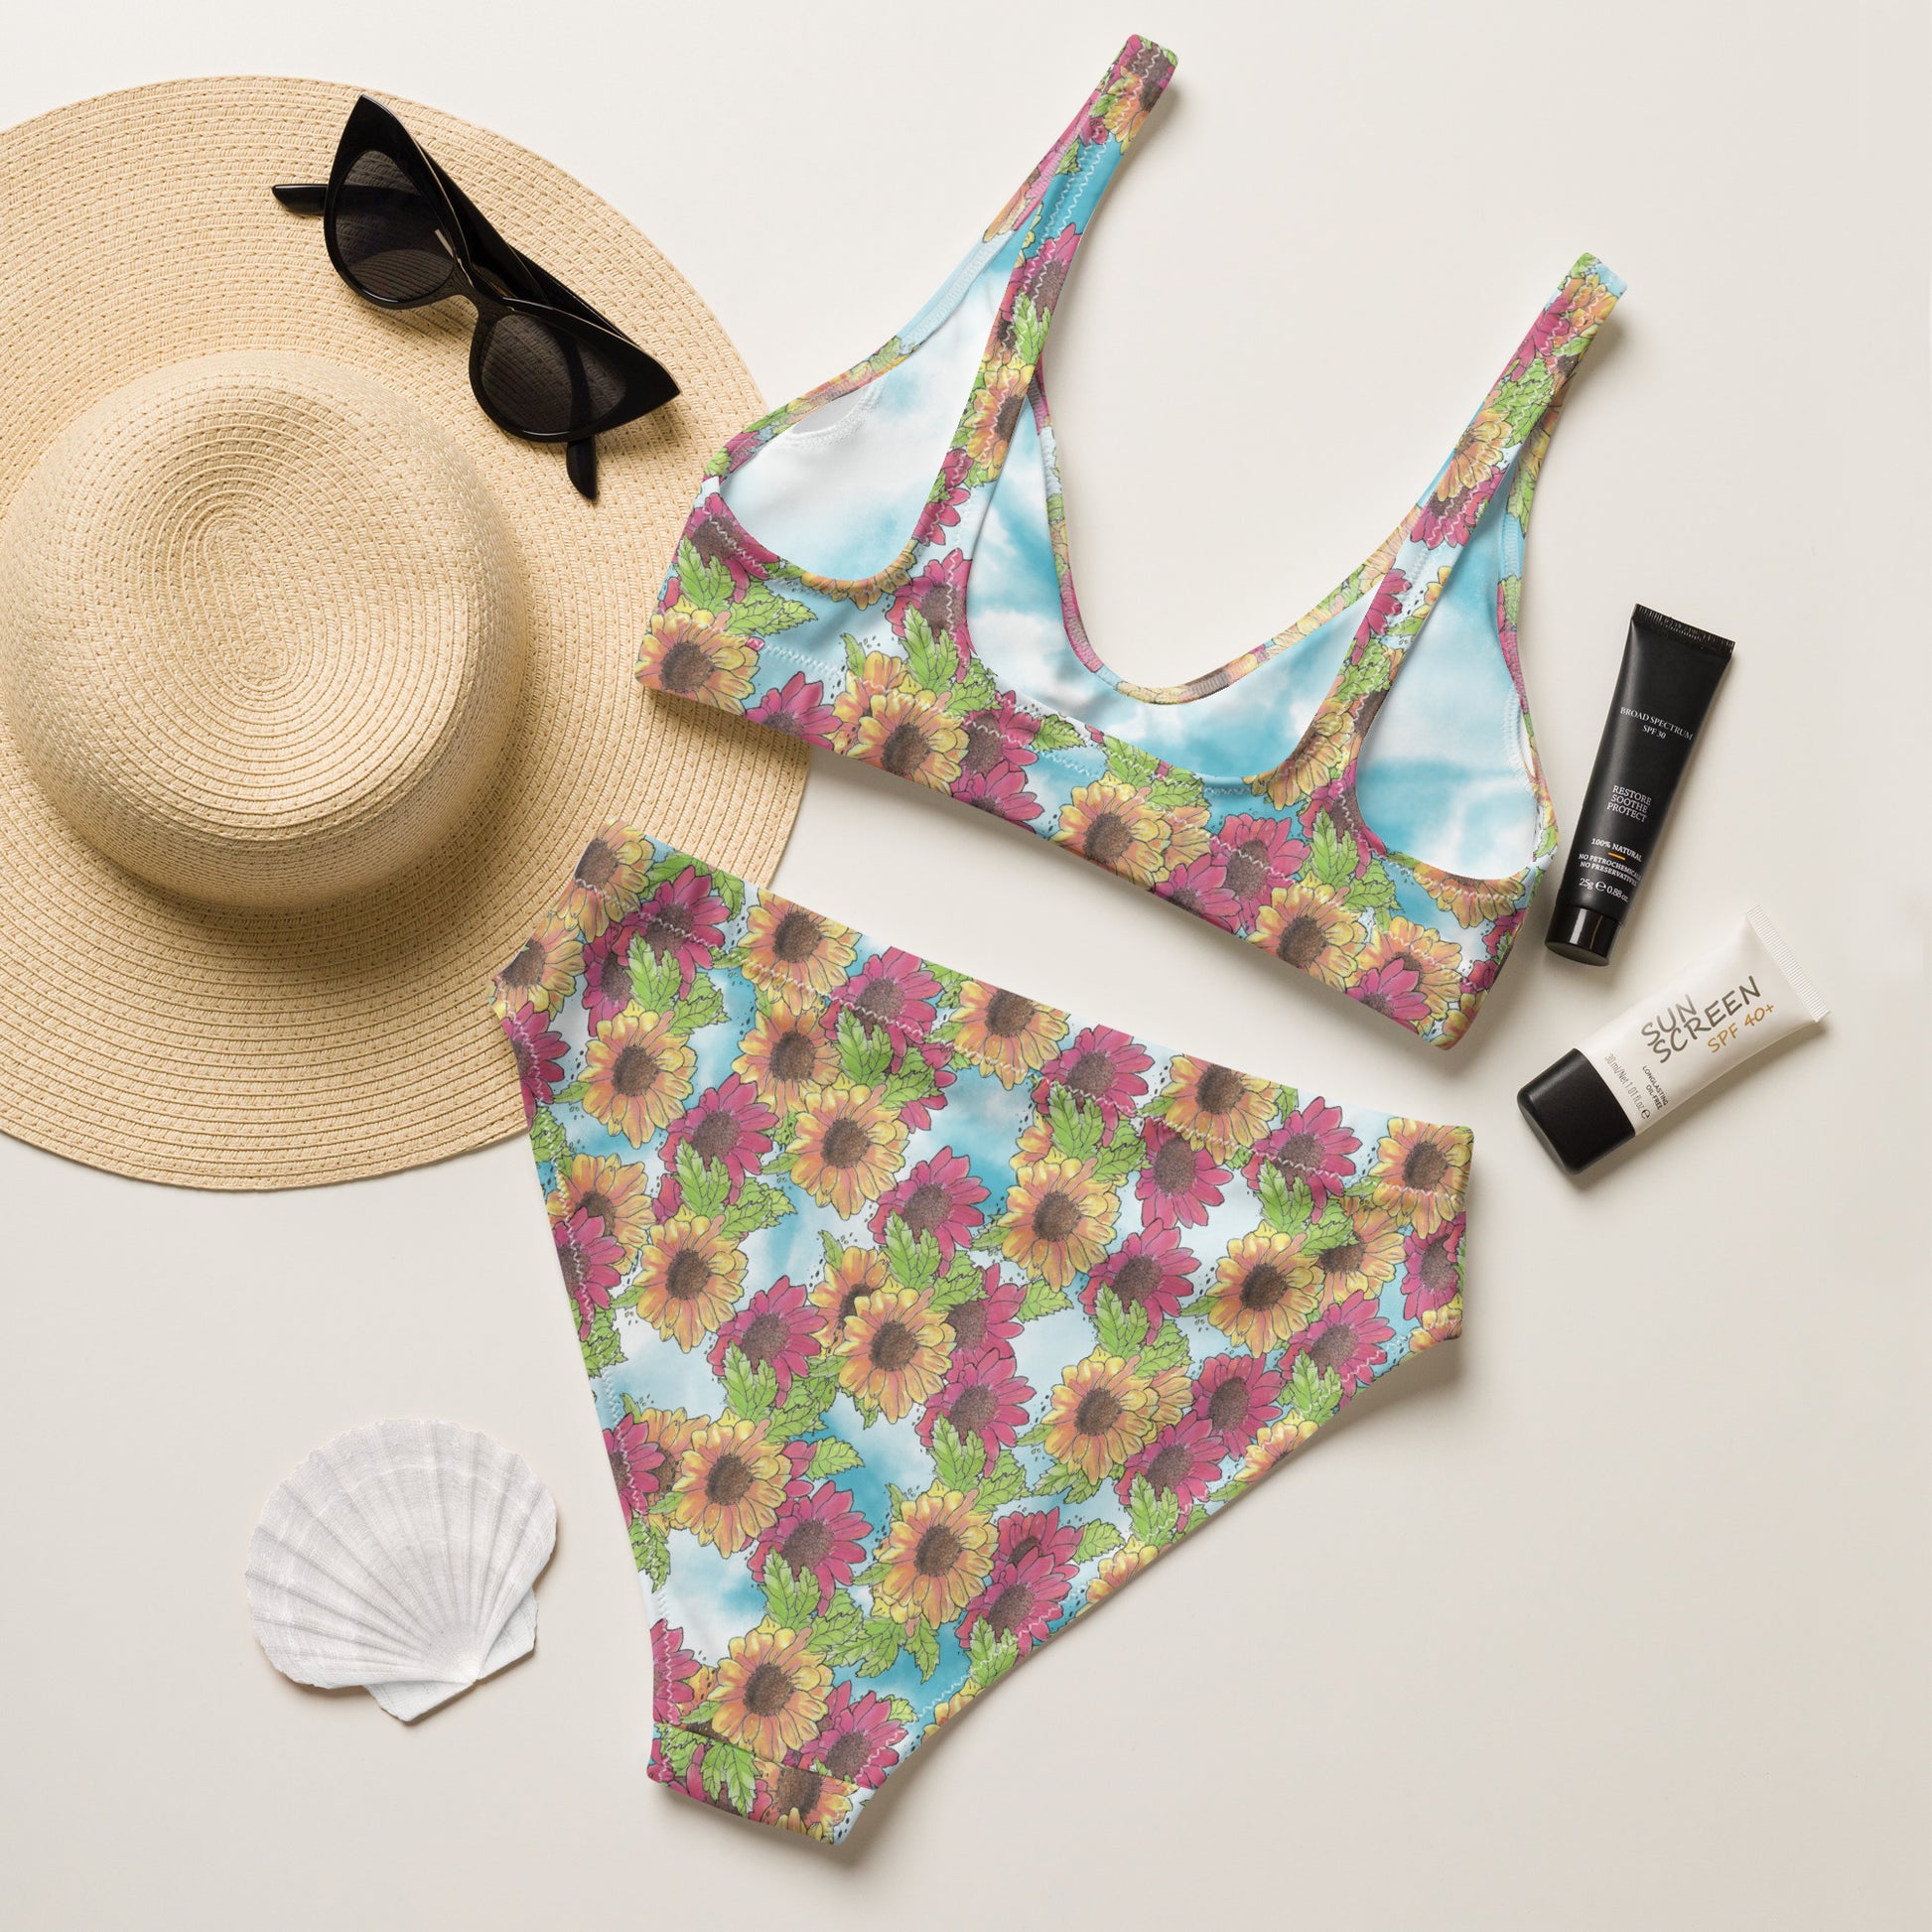 Watercolor Gerber daisy patterned high-waisted bikini. Made from recycled polyester and spandex. Features removable pads and double layers. Back flat lay view shown by sunhat, sunglasses, seashell and sunscreen.